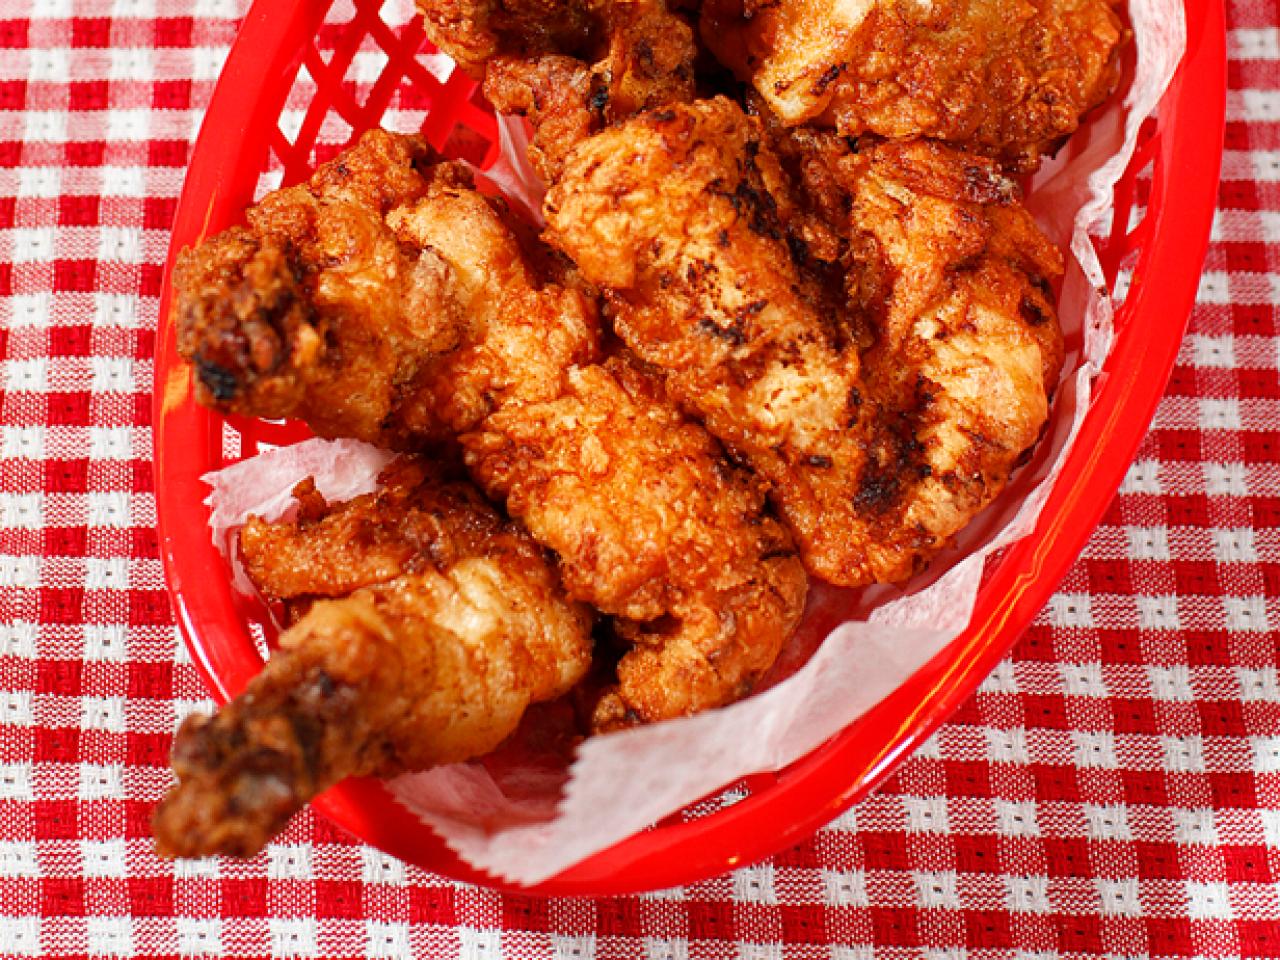 Recipe of the Day: Buttermilk Fried Chicken | FN Dish - Behind-the-Scenes, Food Trends, and Best ...